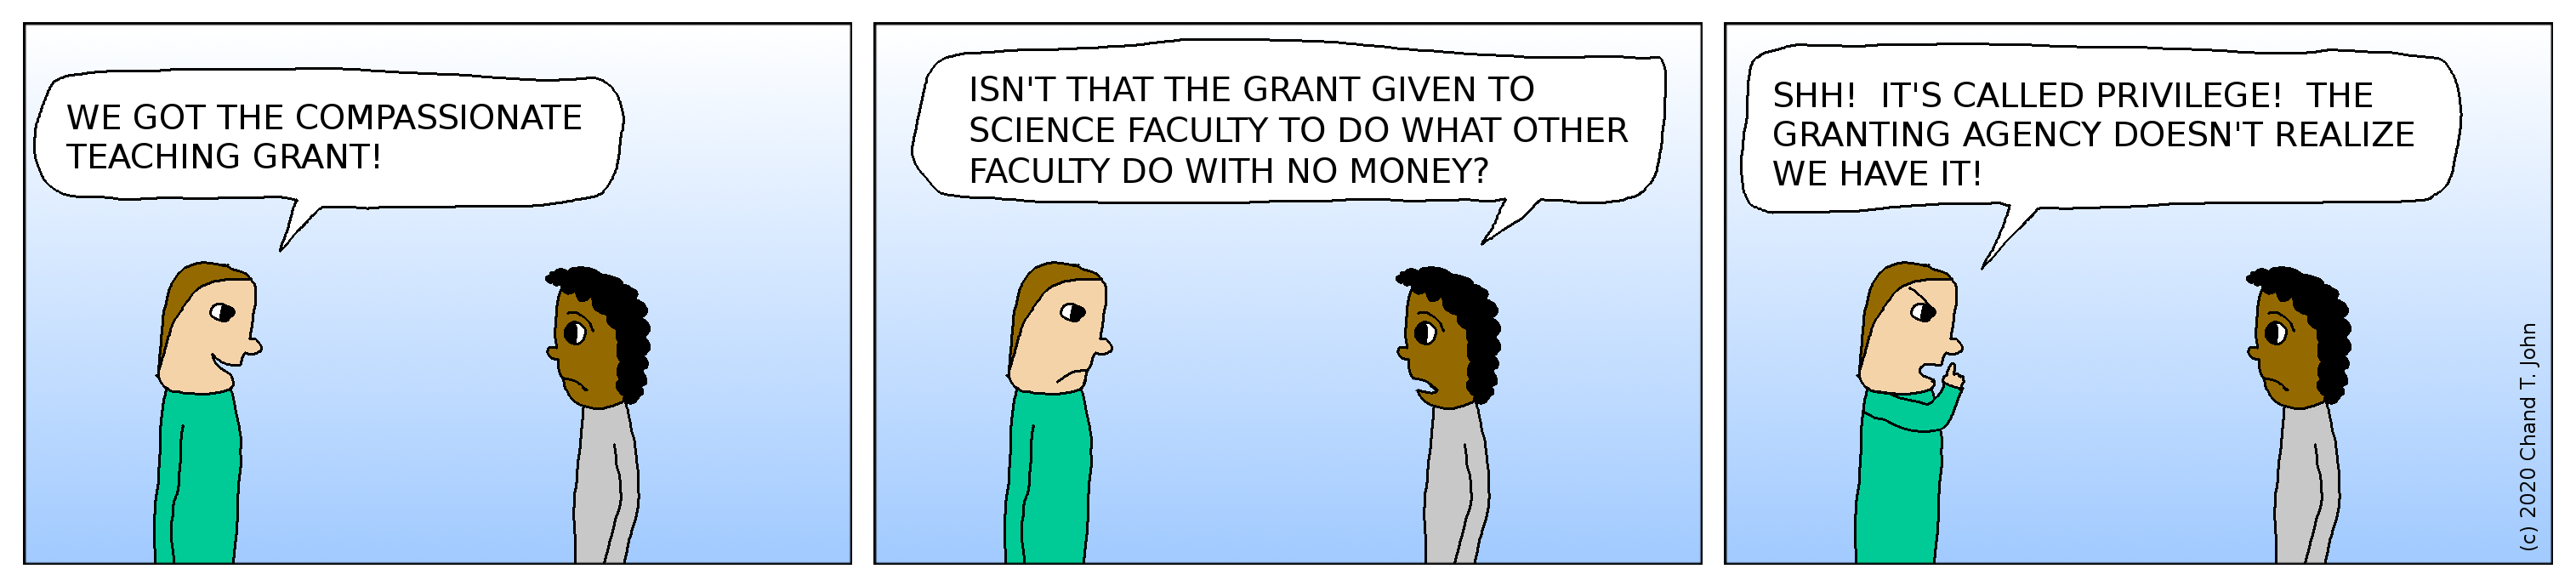 Person says, "We got the compassionate teaching grant!" Other person says, "Isn't that the grant given to science faculty to do what other faculty do with no money?" First person says, "Shh! It's called privilege! The granting agency doesn't realize we have it!"